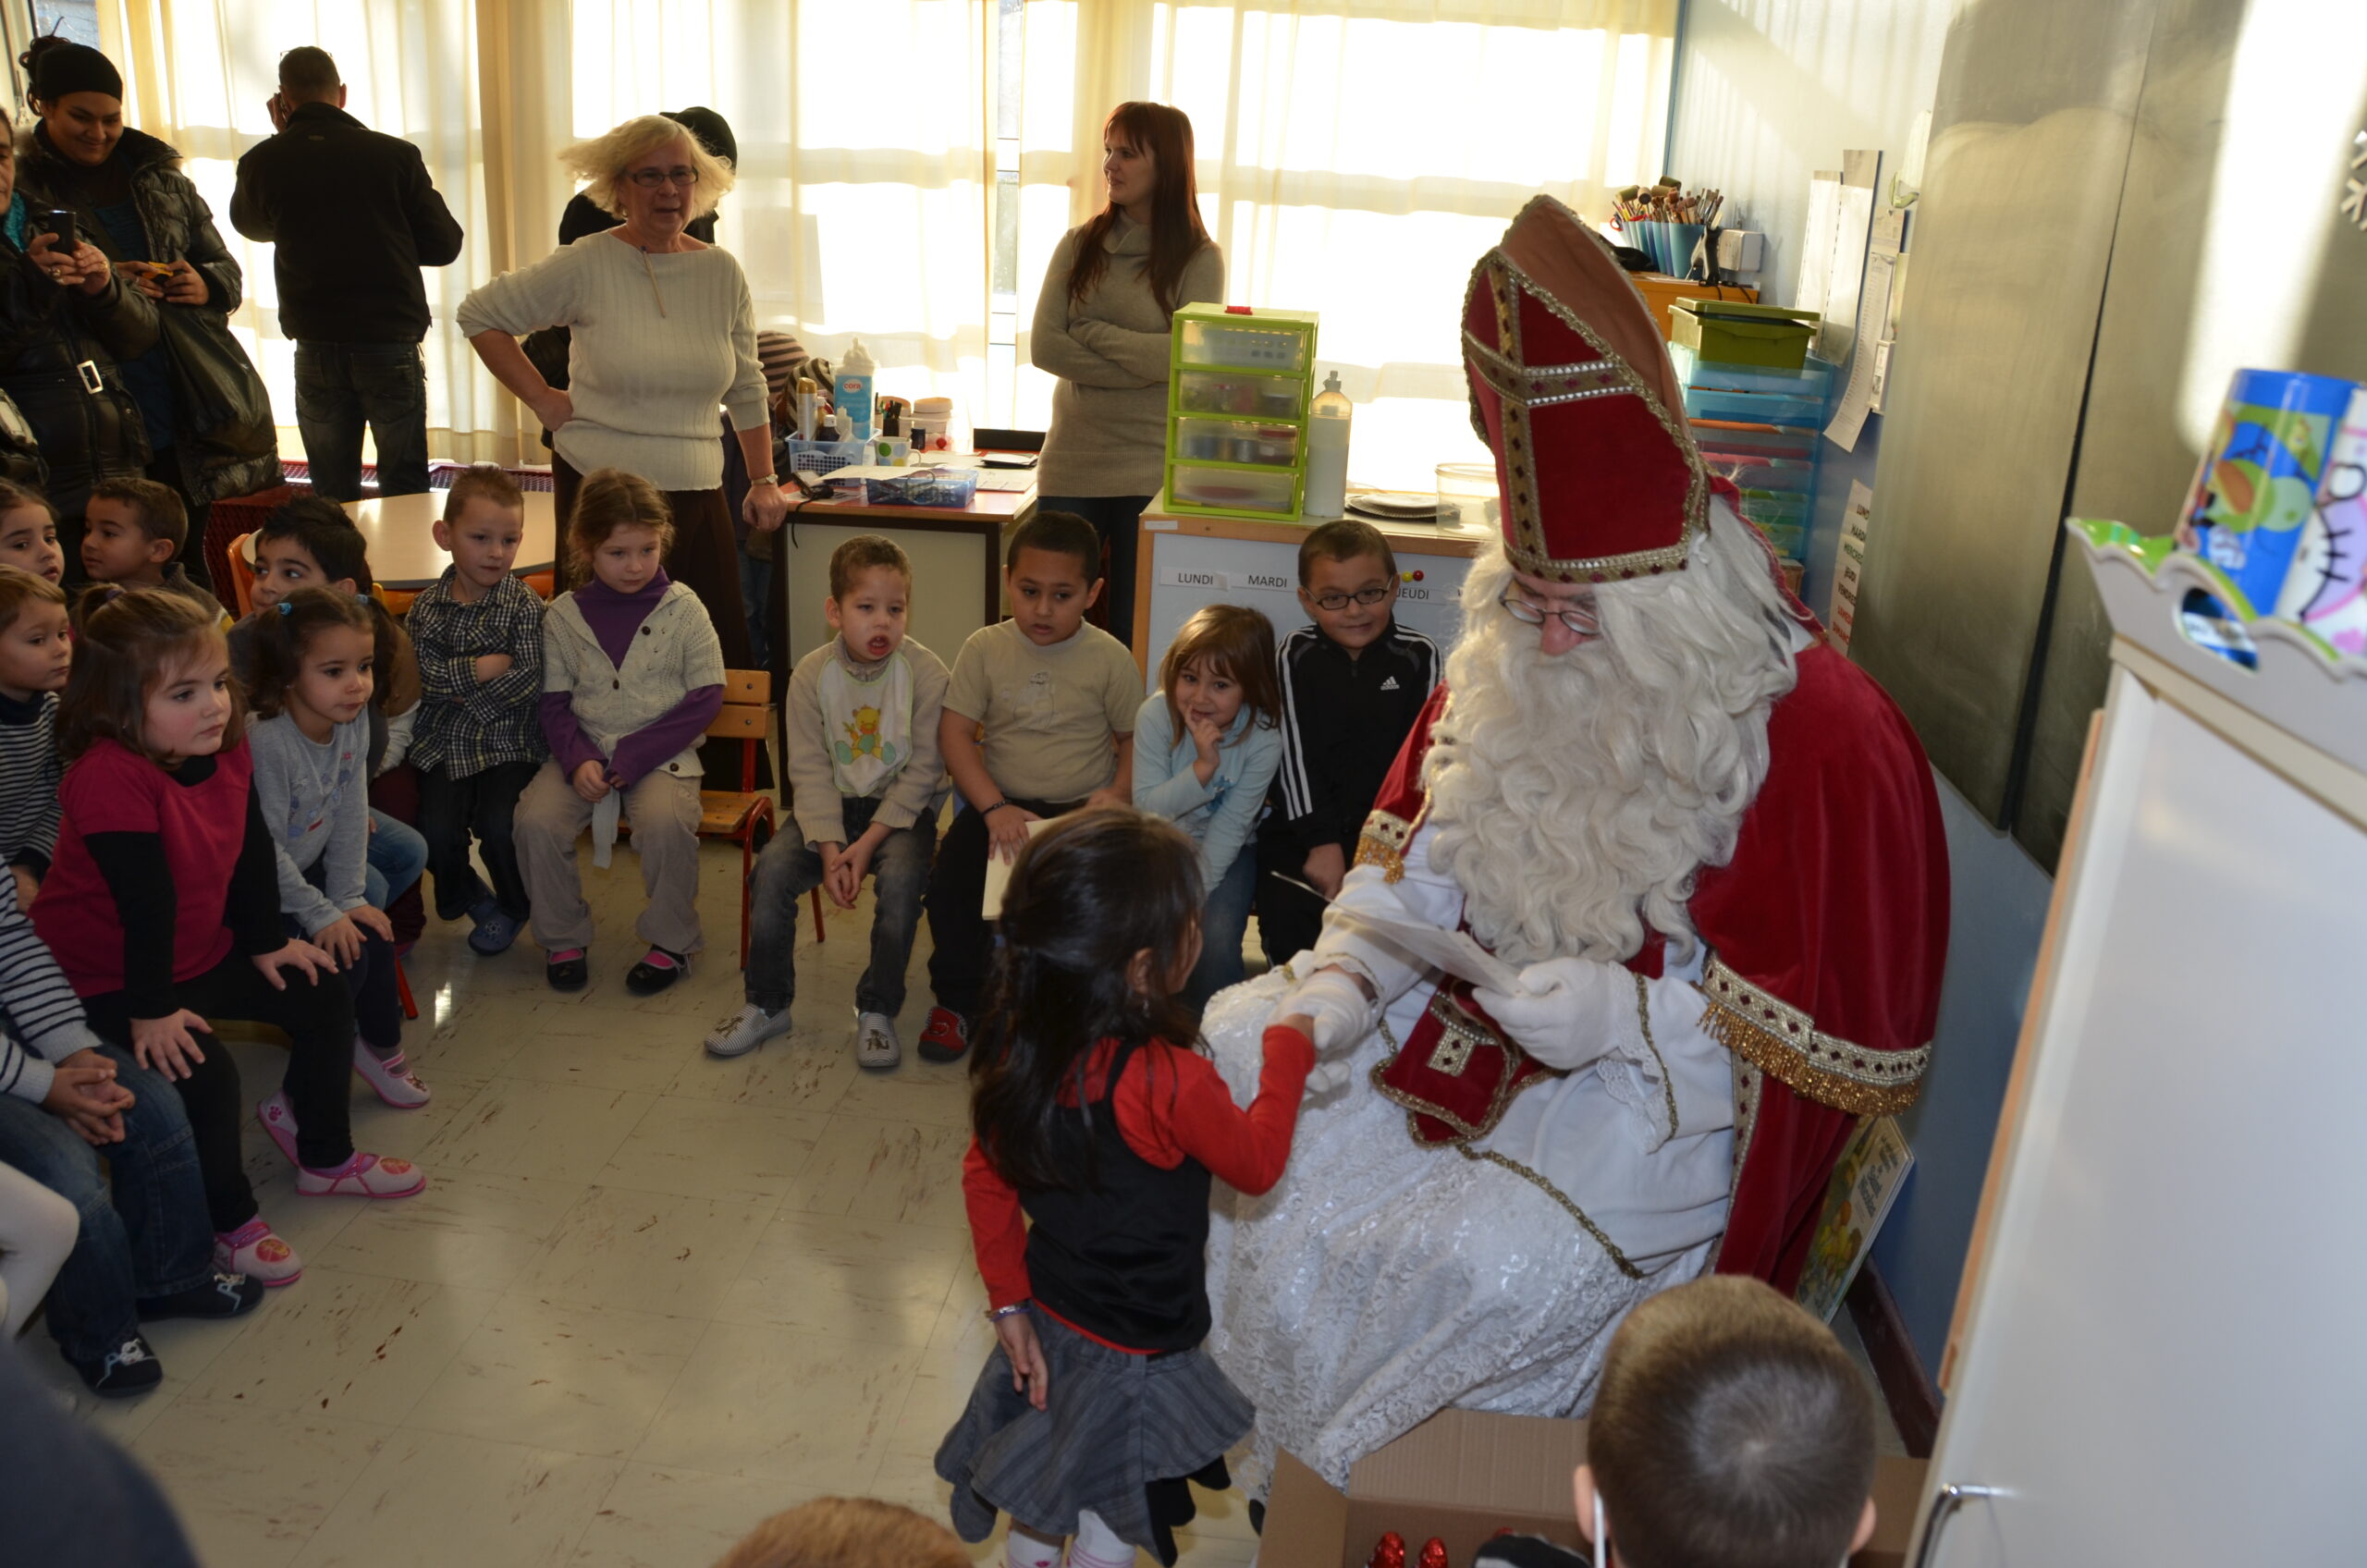 A photo of a group of schoolchildren in a classroom surrounding someone dressed as Saint Nicholas. In 2012 a group from Fayetteville visited a St Avold grade school on Dec 6, St Nicolas Day.